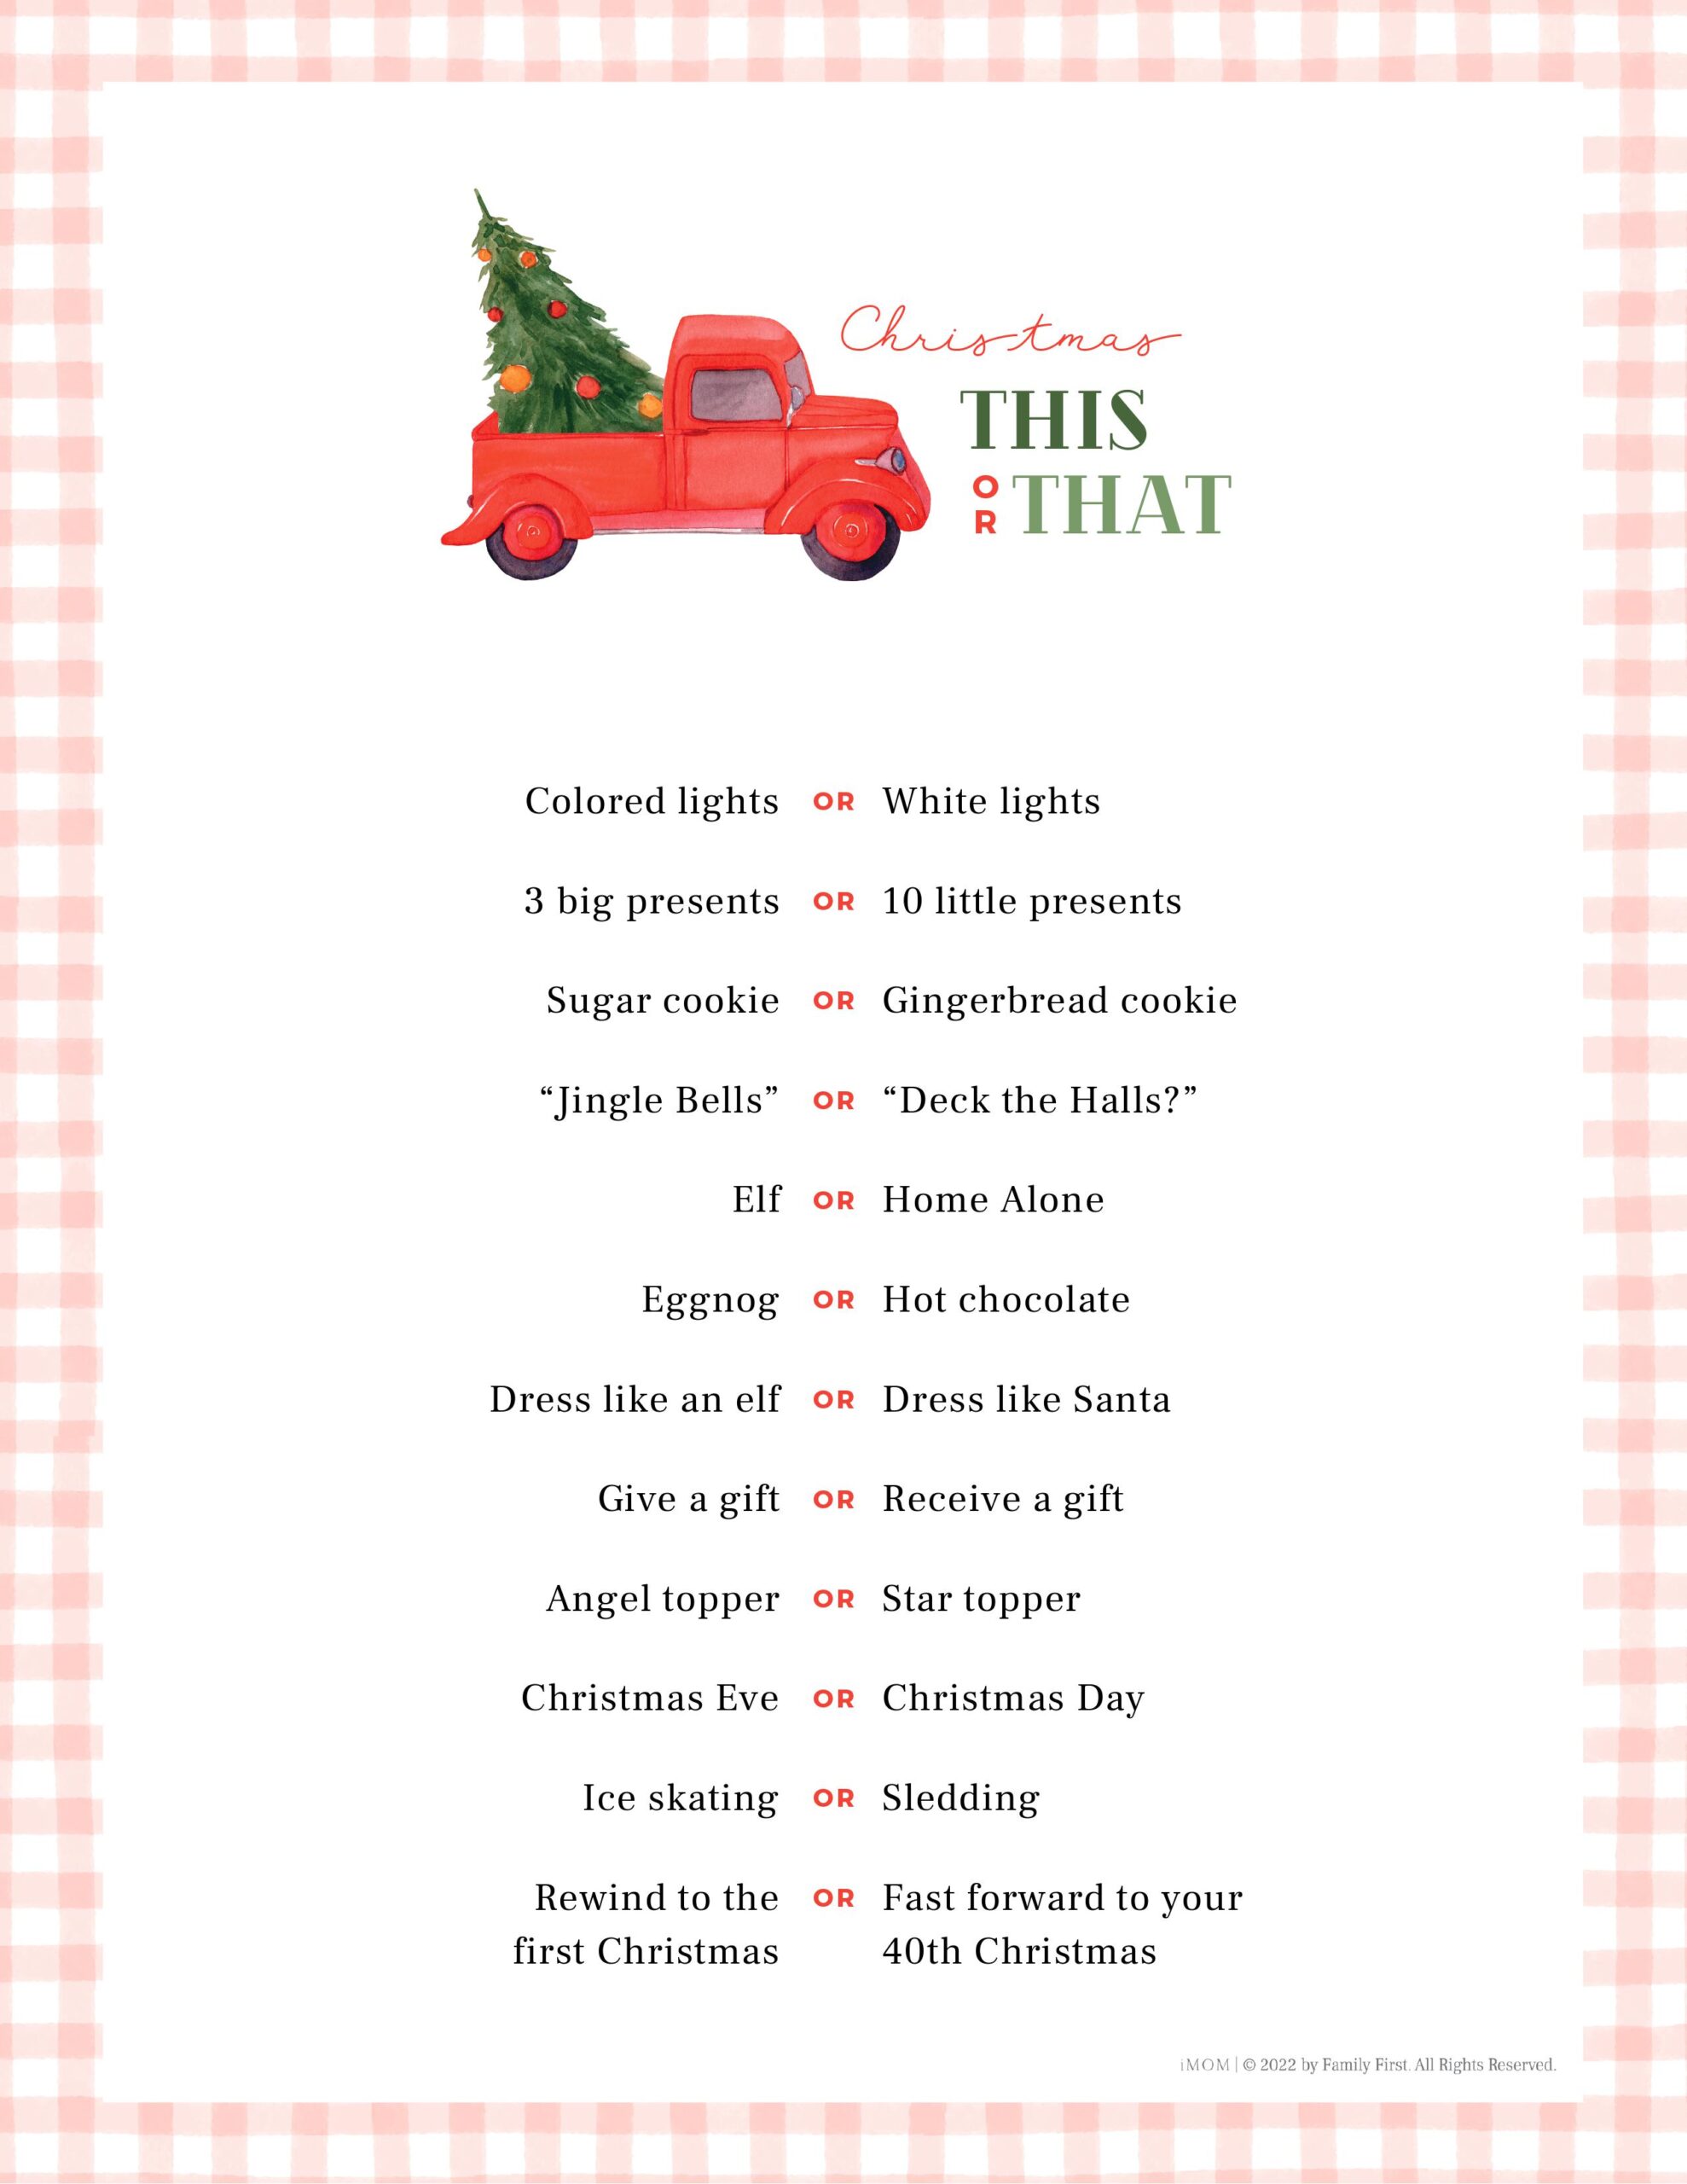 Christmas This or That for Kids - iMOM